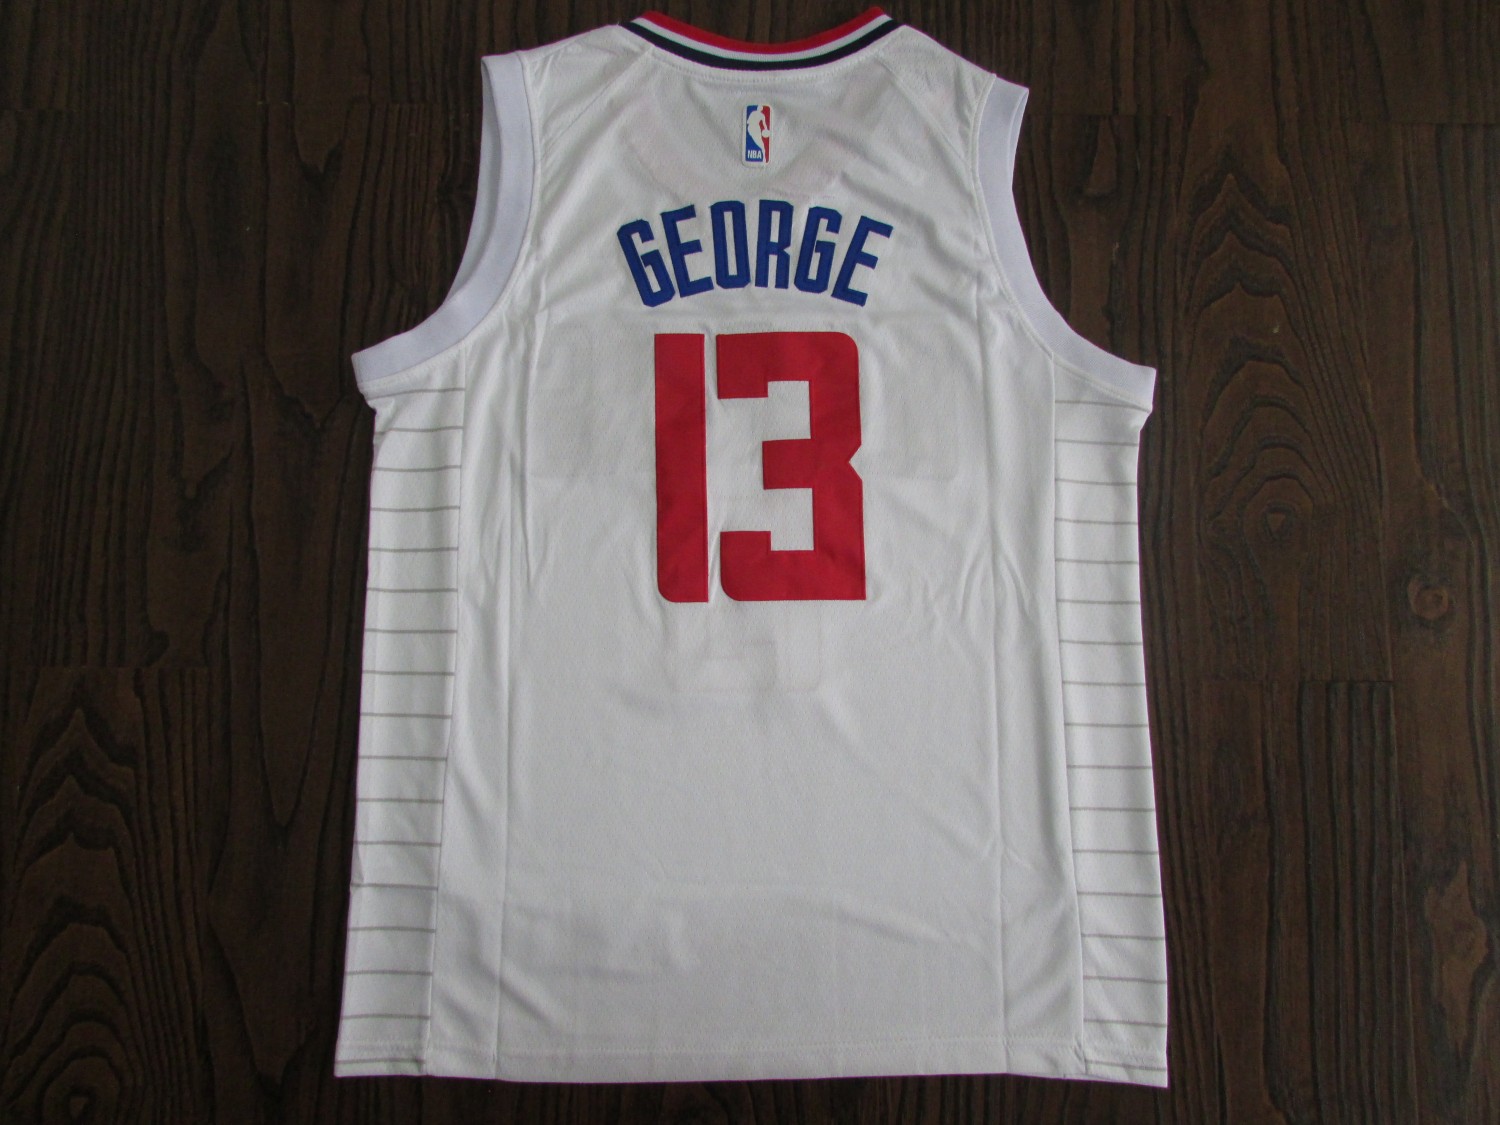 19/20 Men Clippers basketball jersey shirt George 13 white